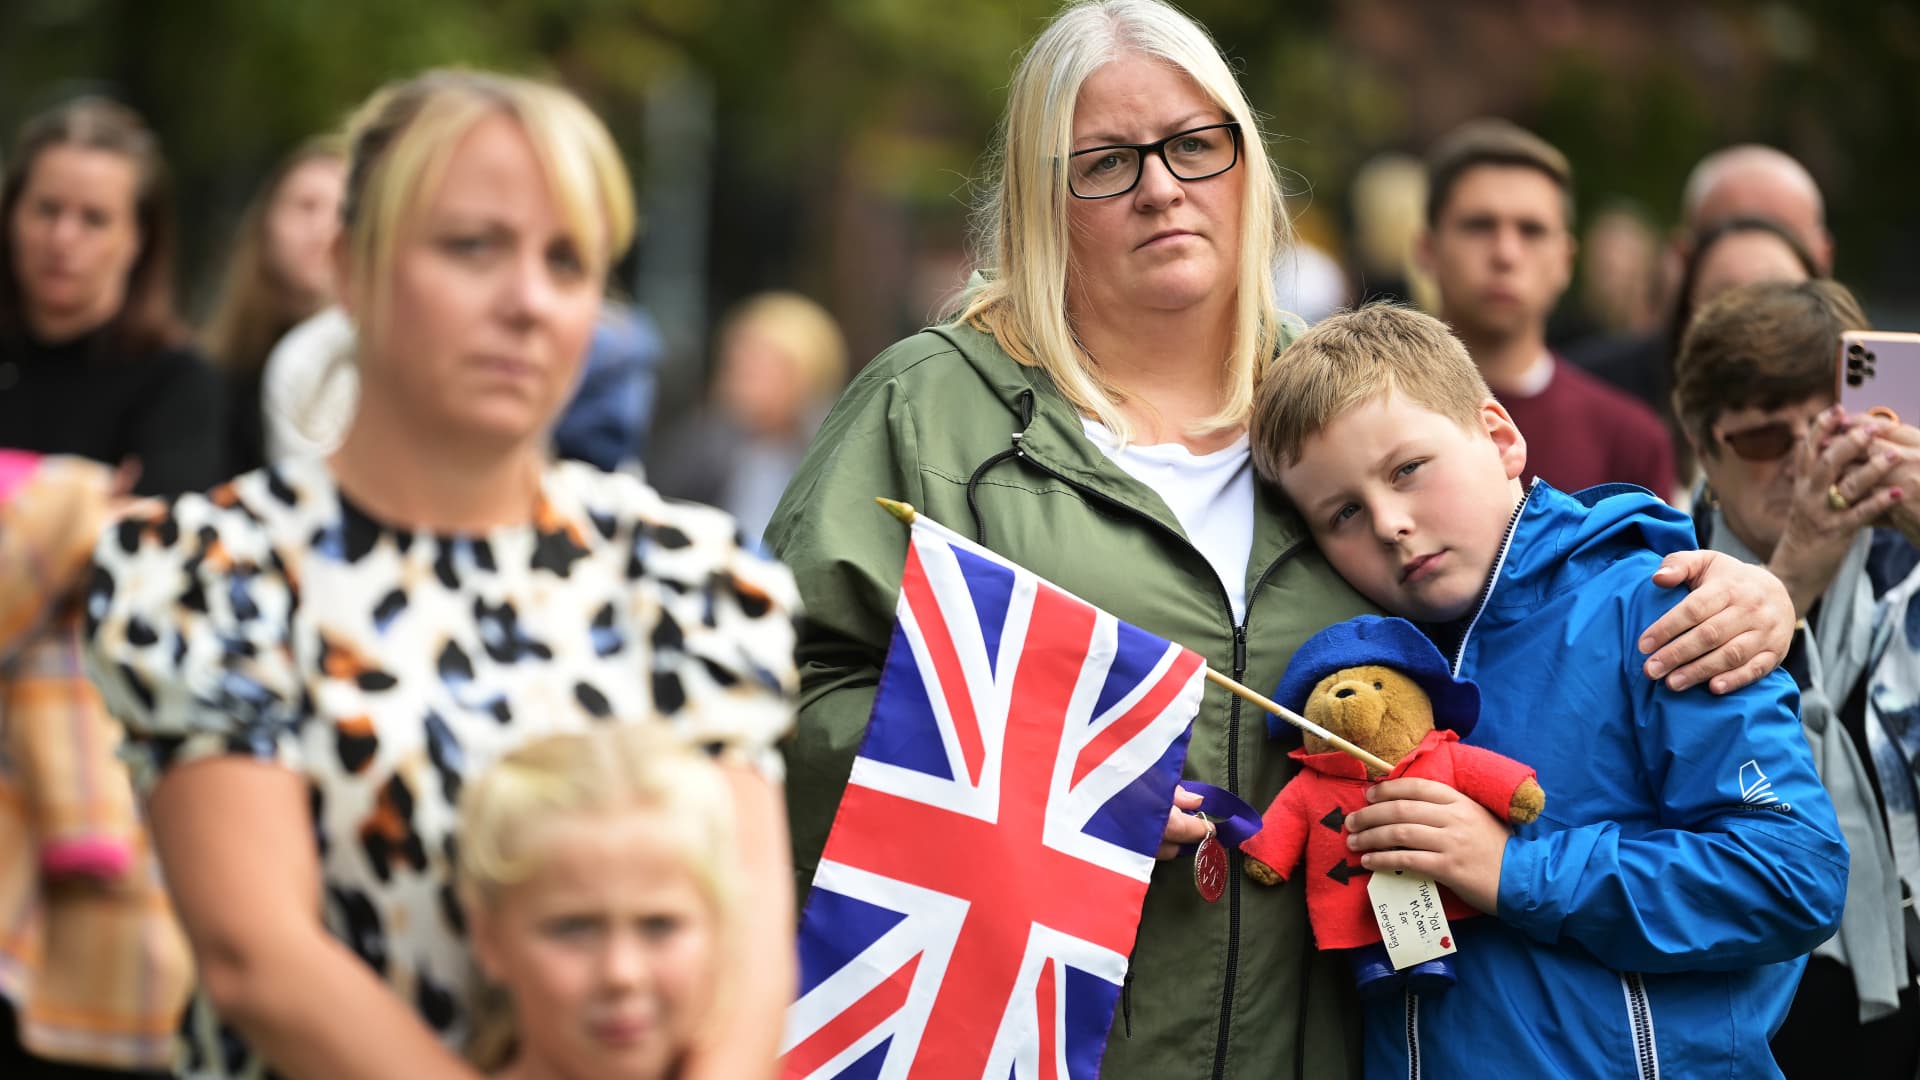 A young boy is comforted by his mother as crowds of people gather to watch the funeral of Her Majesty Queen Elizabeth II on a screen in the grounds of Belfast city hall on September 19, 2022 in Belfast, United Kingdom. Elizabeth Alexandra Mary Windsor was born in Bruton Street, Mayfair, London on 21 April 1926.